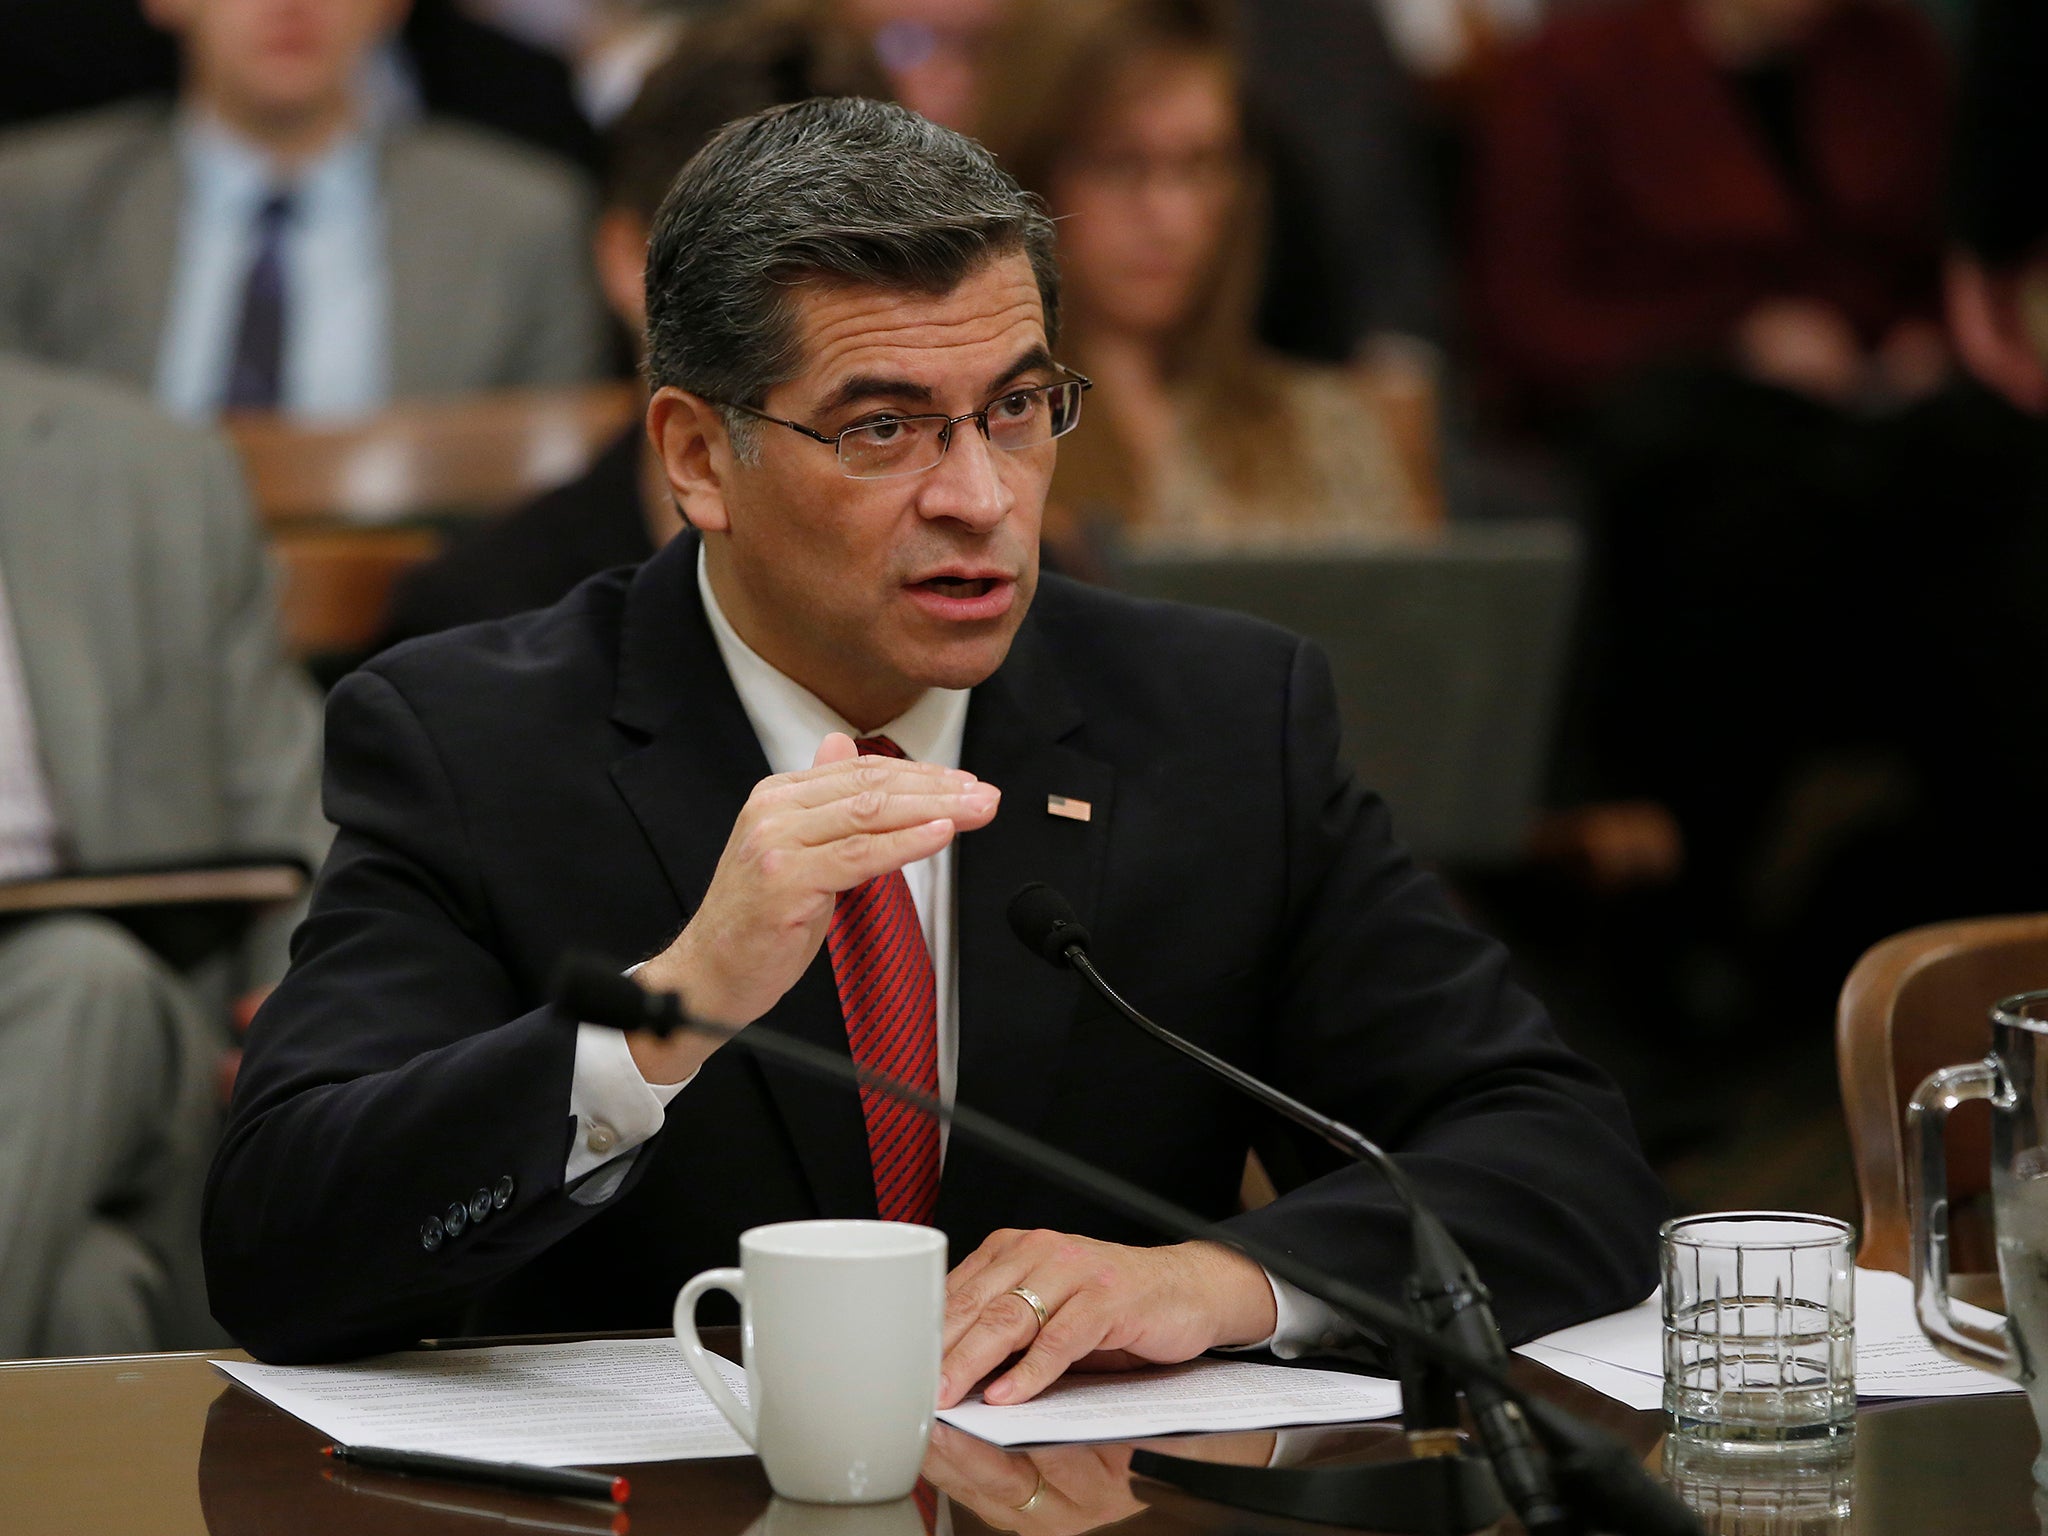 Representative Xavier Becerra responds to a lawmaker’s question during during his confirmation hearing before the Assembly Special Committee on the Office of the Attorney General in Sacramento, California